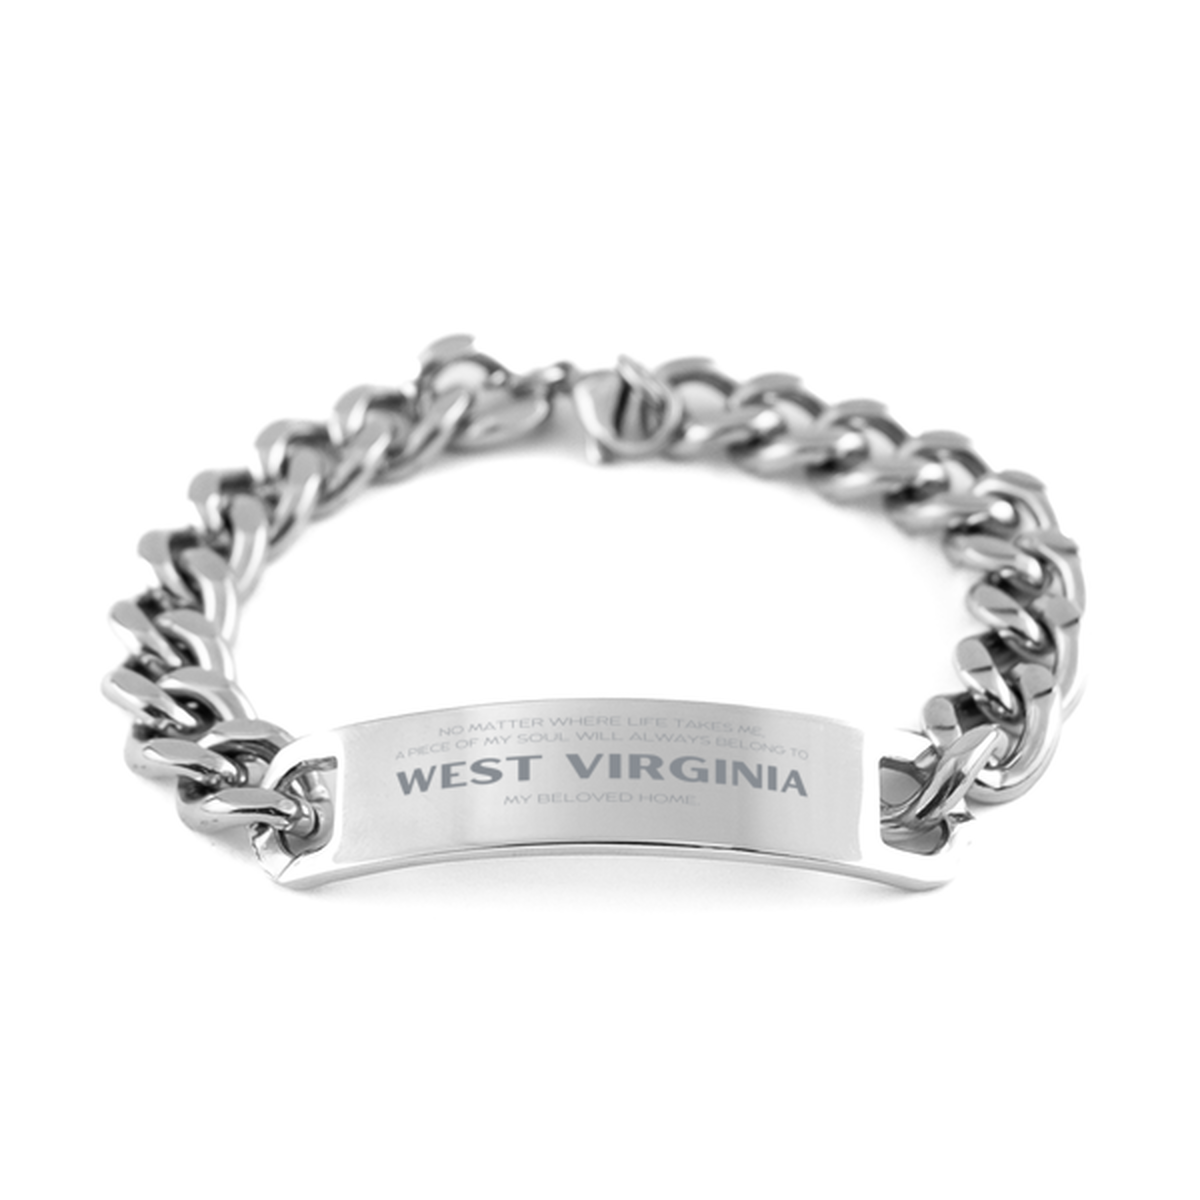 Love West Virginia State Gifts, My soul will always belong to West Virginia, Proud Cuban Chain Stainless Steel Bracelet, Birthday Unique Gifts For West Virginia Men, Women, Friends